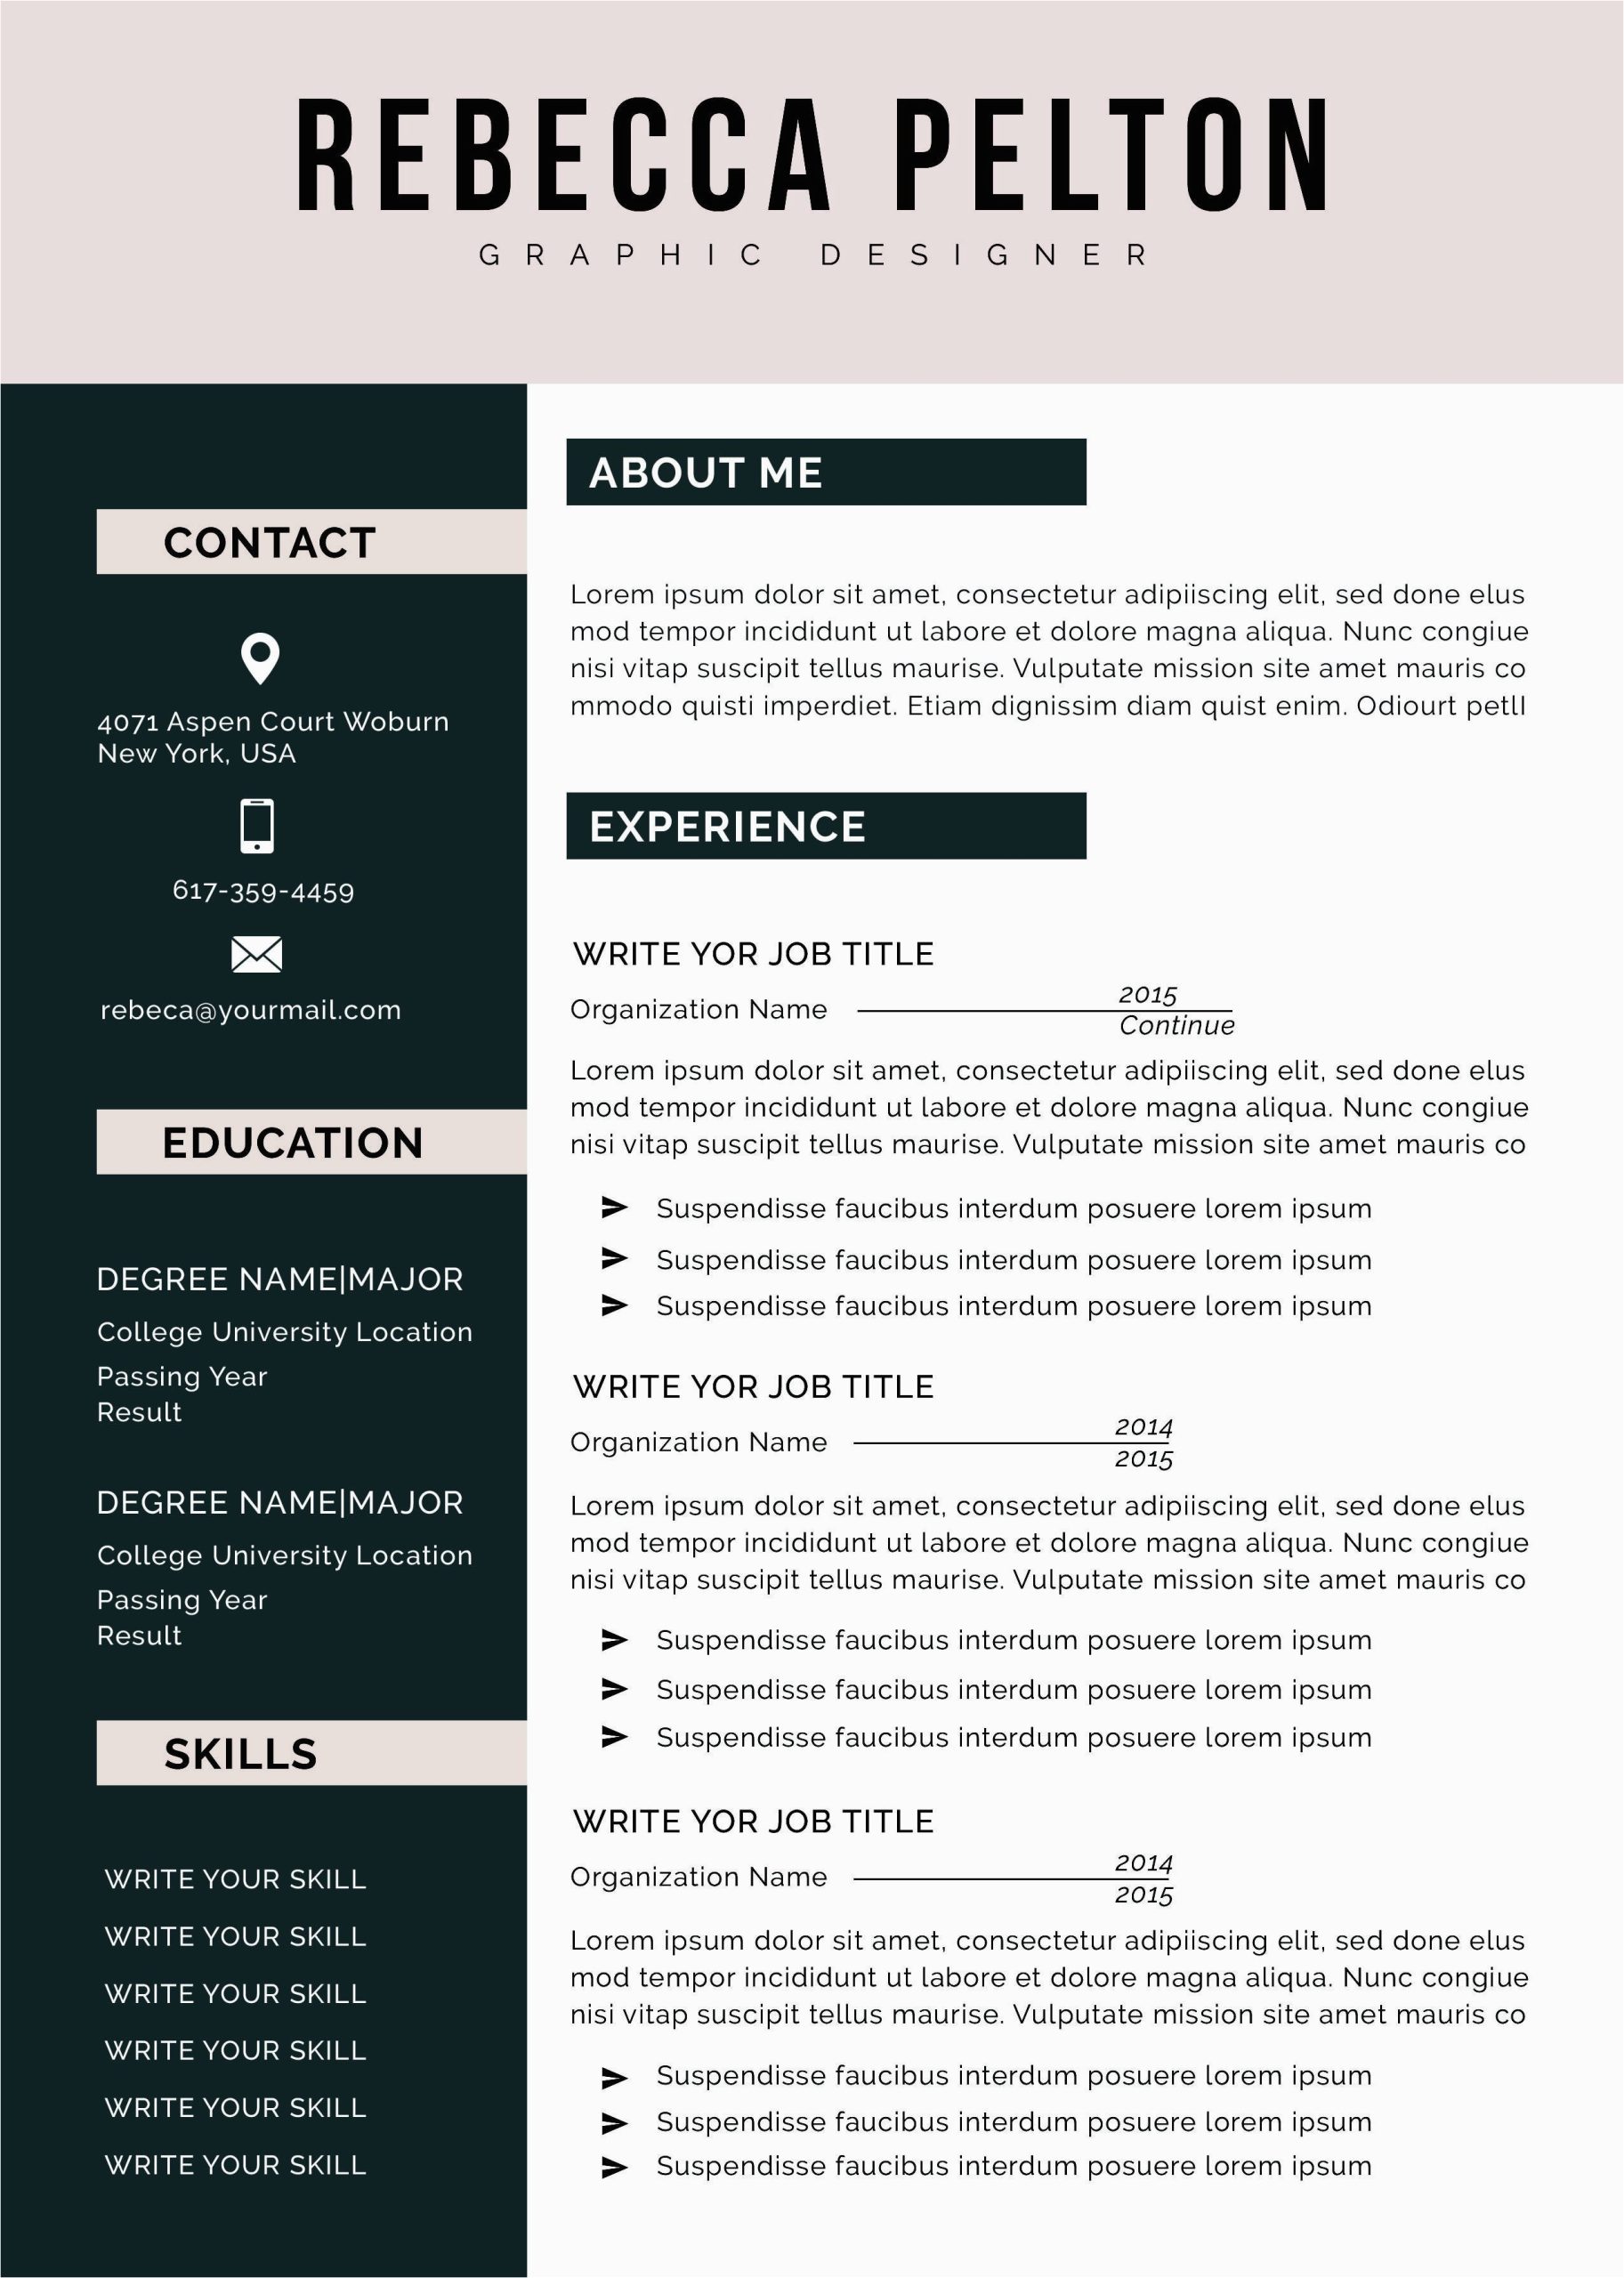 Samples Of Different Styles Of Resumes Modern Resumes What’s Your Opinion Calgary